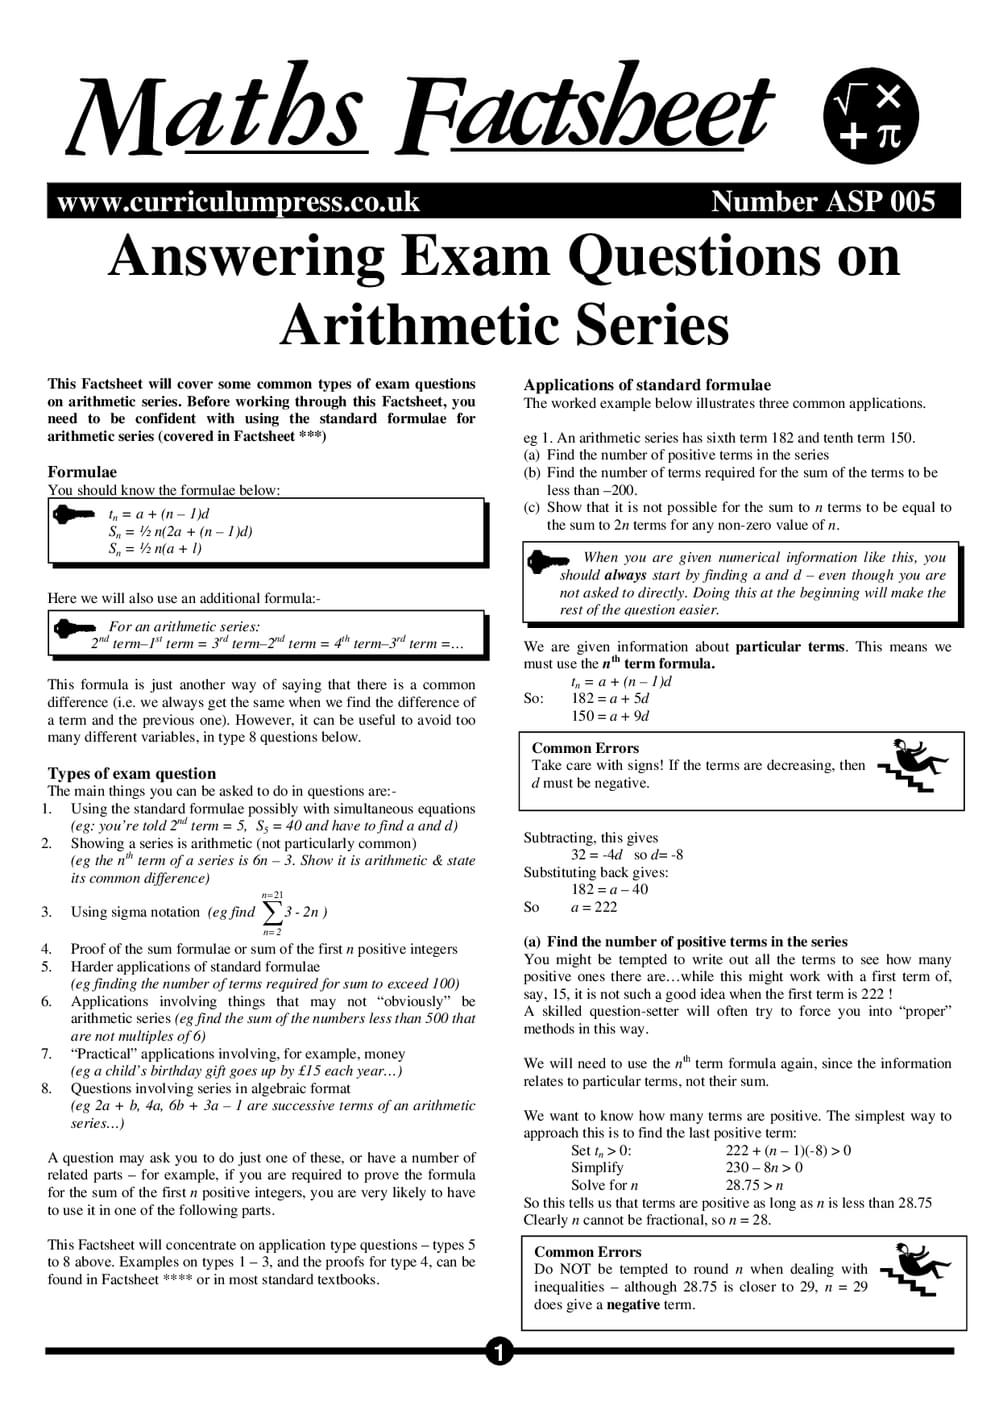 Asp05 Answering Exam Questions On Arithmetic Series